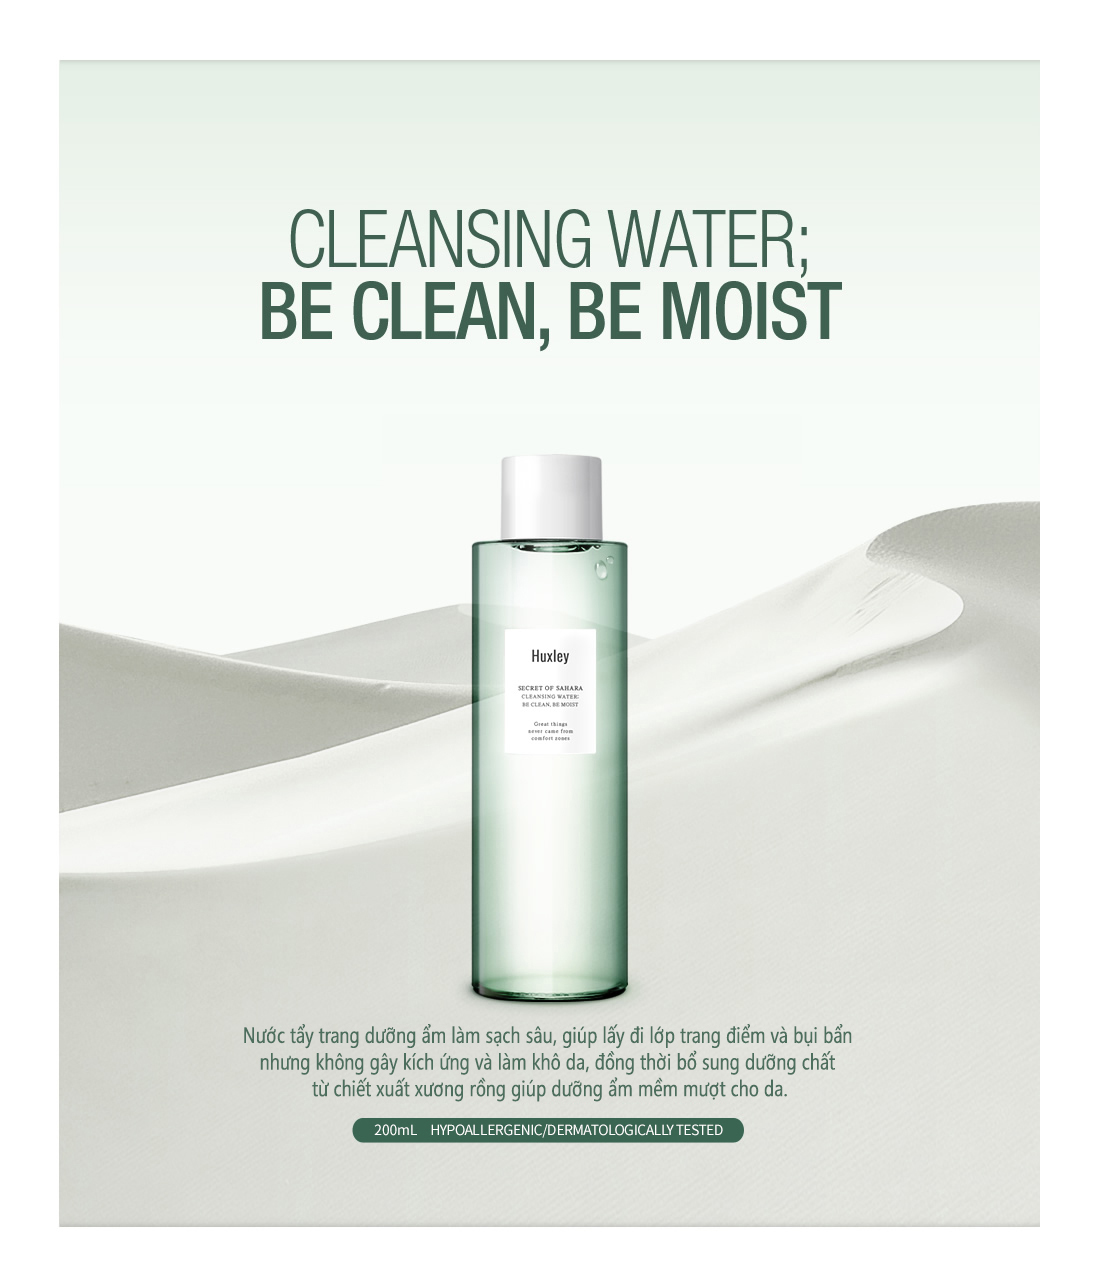 -nuoc-tay-trang-diu-nhe-chiet-xuat-xuong-rong-huxley-cleansing-water-be-clean-be-most-1